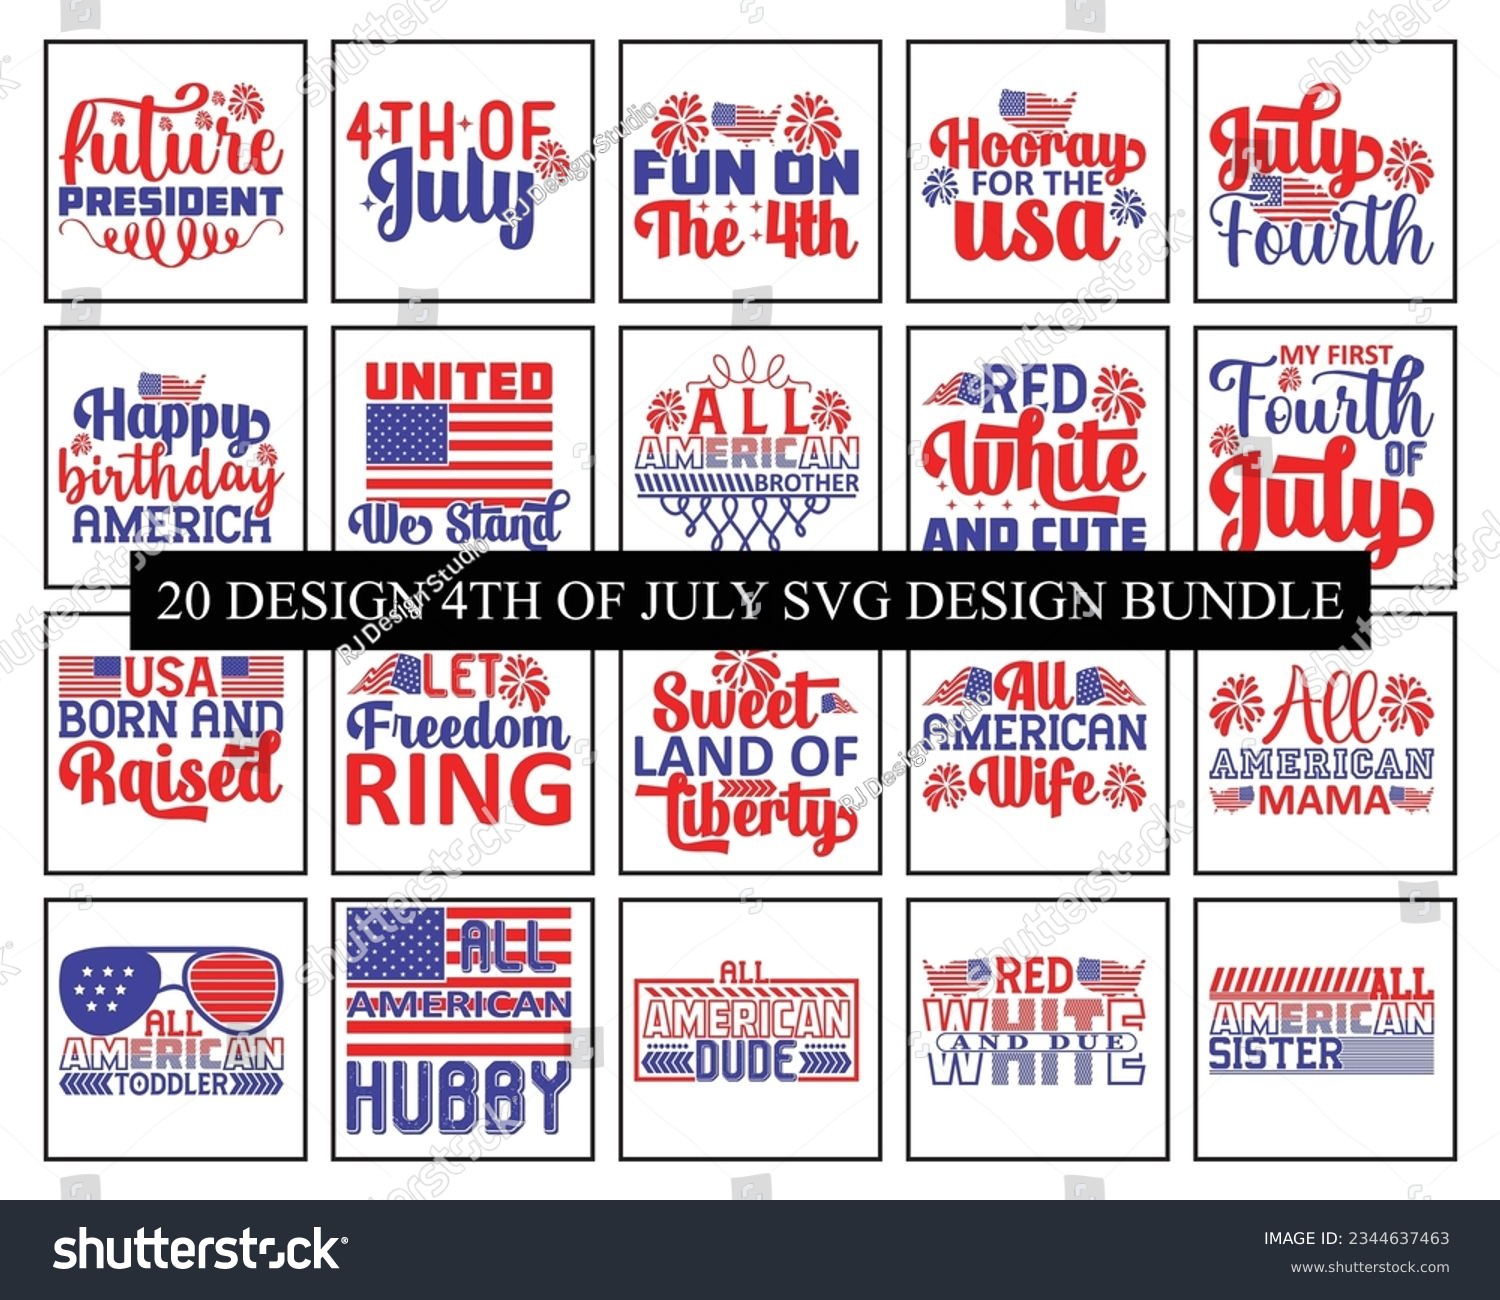 SVG of 4th of July SVG Design Bundle , 4th of July SVG Quotes, Retro 4th of July svg